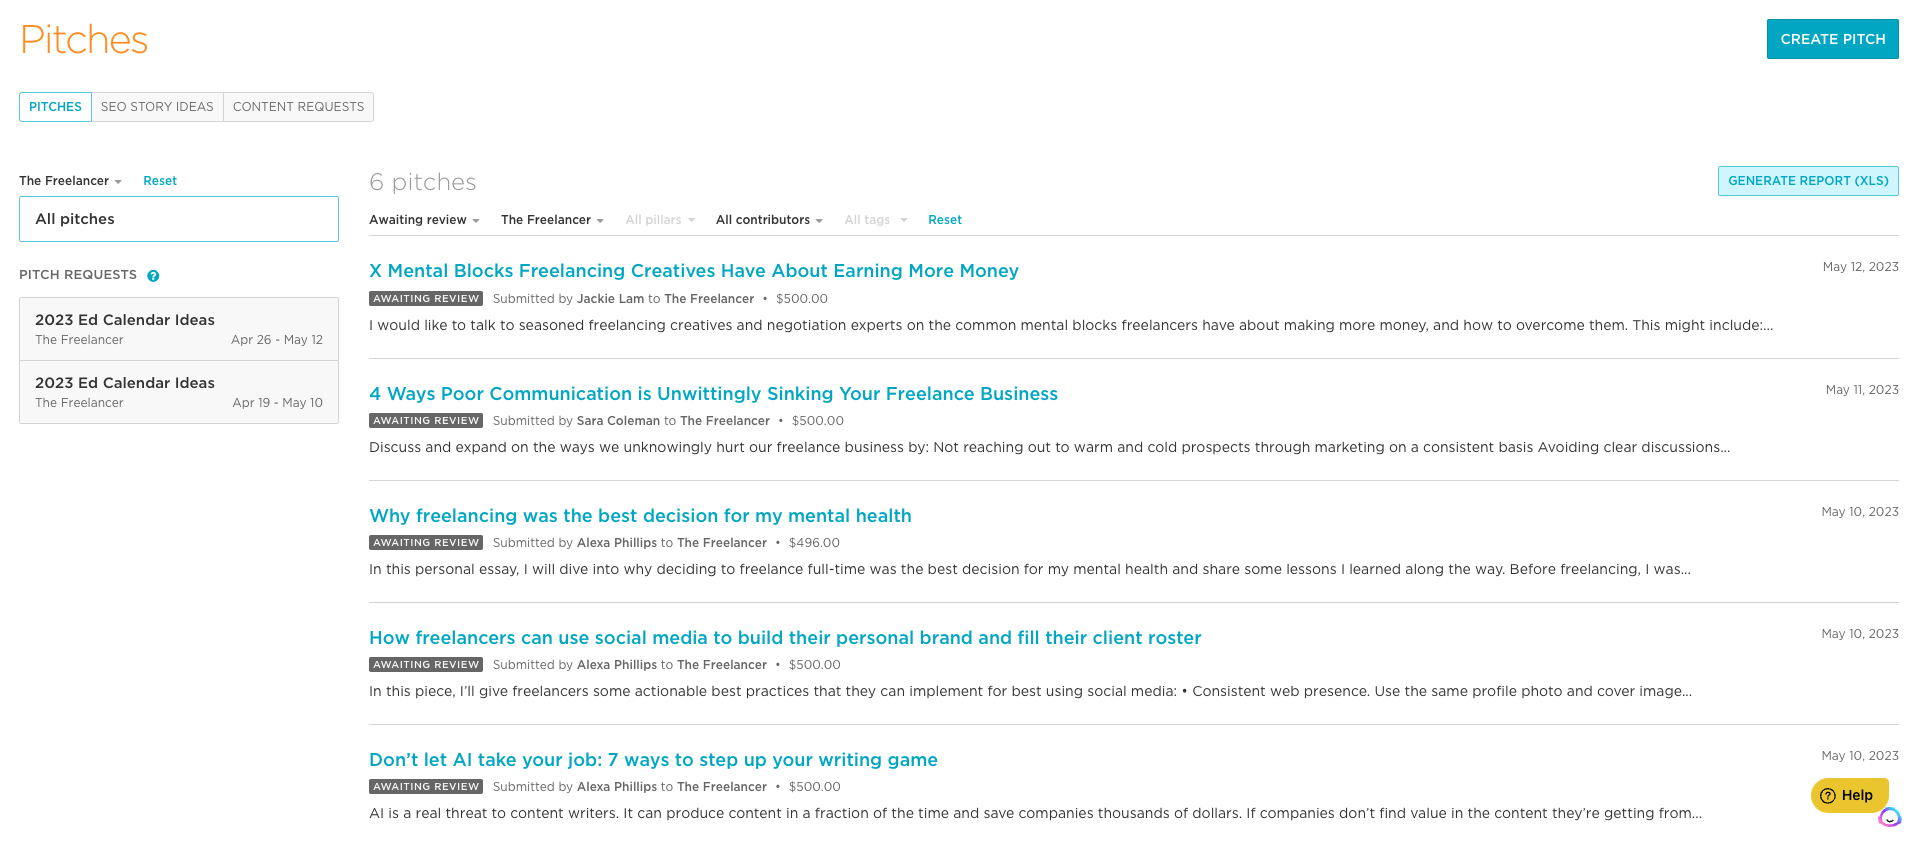 Ideate content marketing topics with Contently 